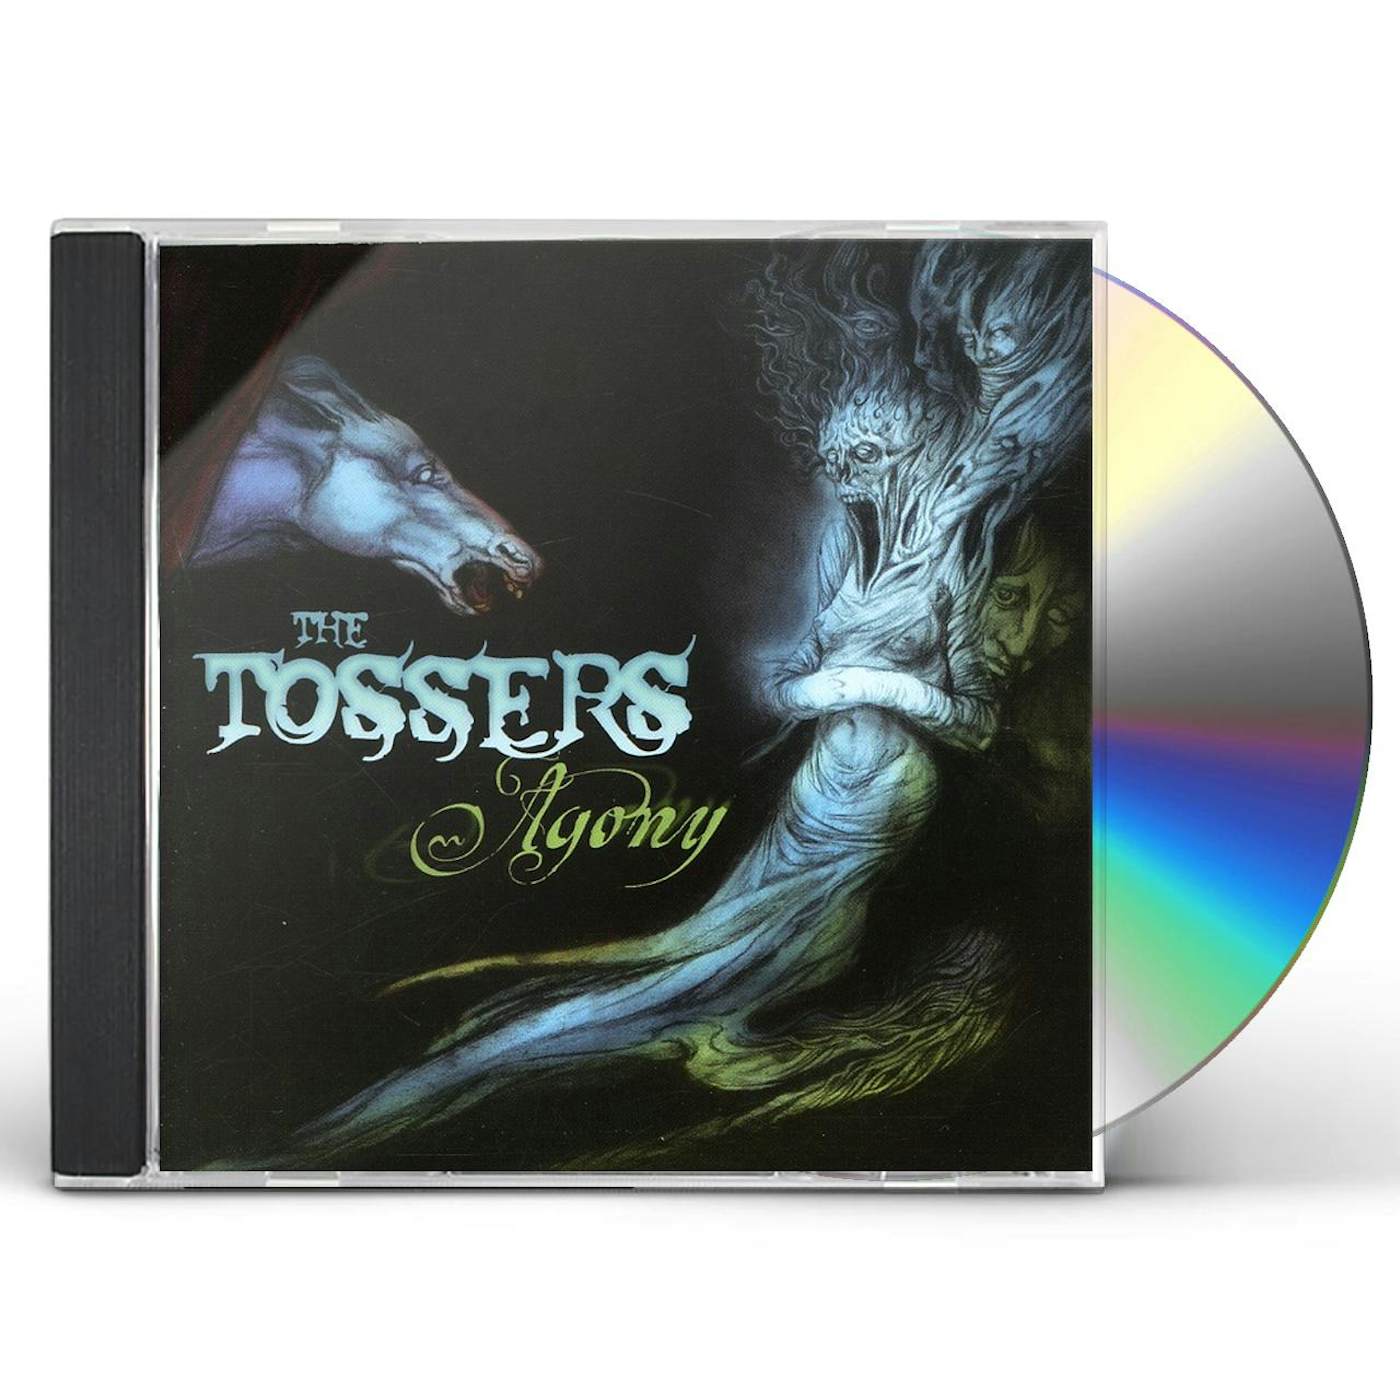 The Tossers AGONY CD